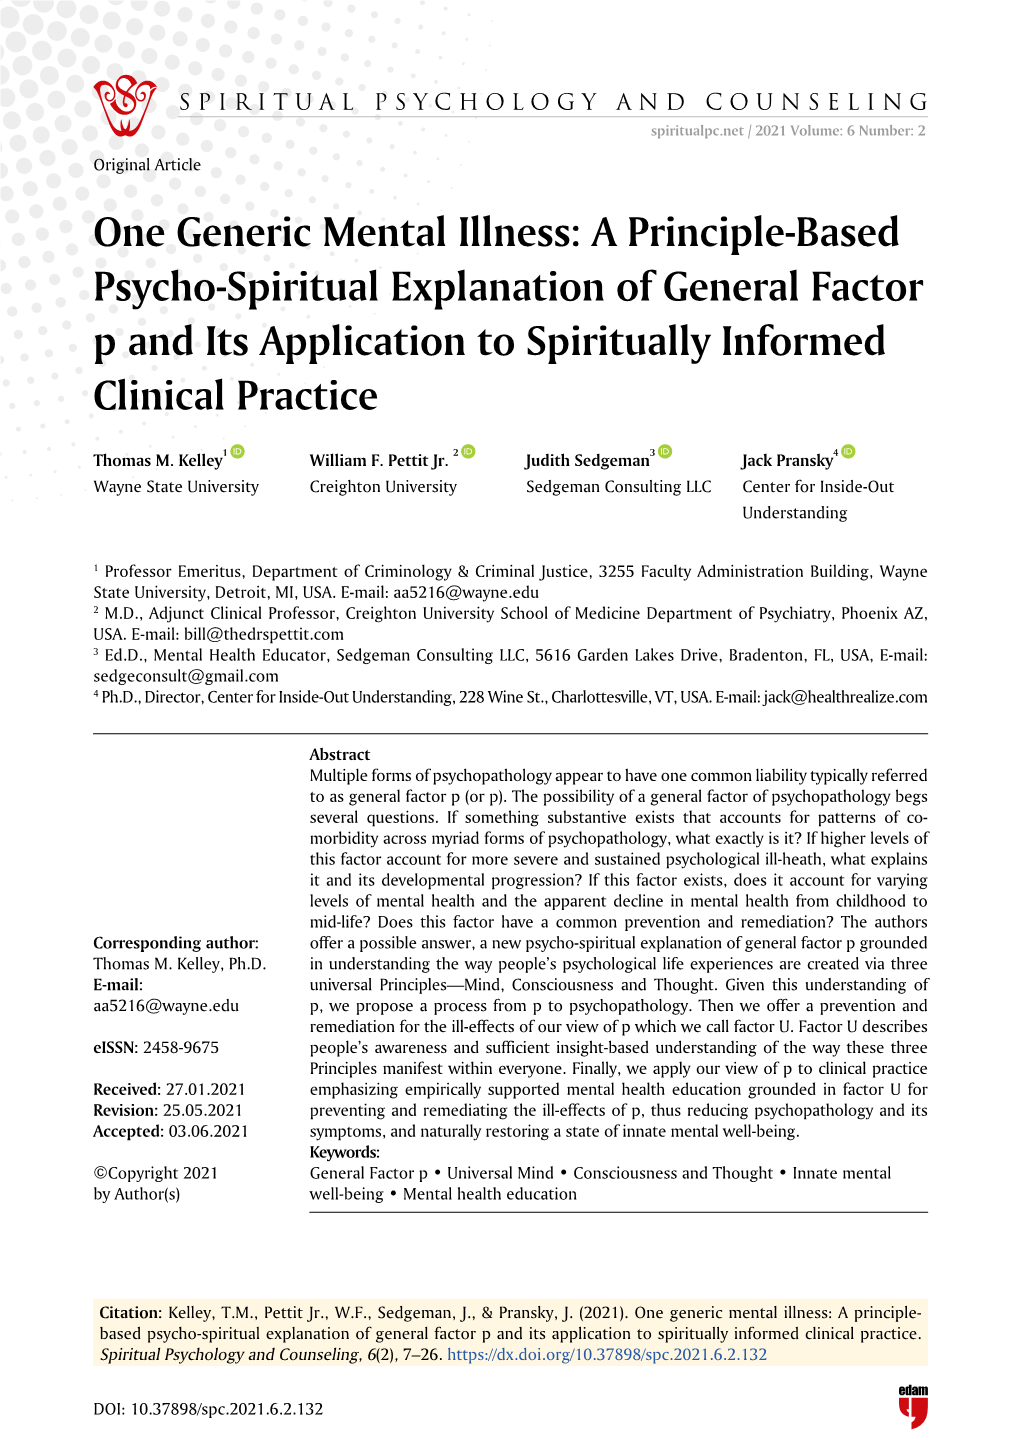 One Generic Mental Illness: a Principle-Based Psycho-Spiritual Explanation of General Factor P and Its Application to Spiritually Informed Clinical Practice